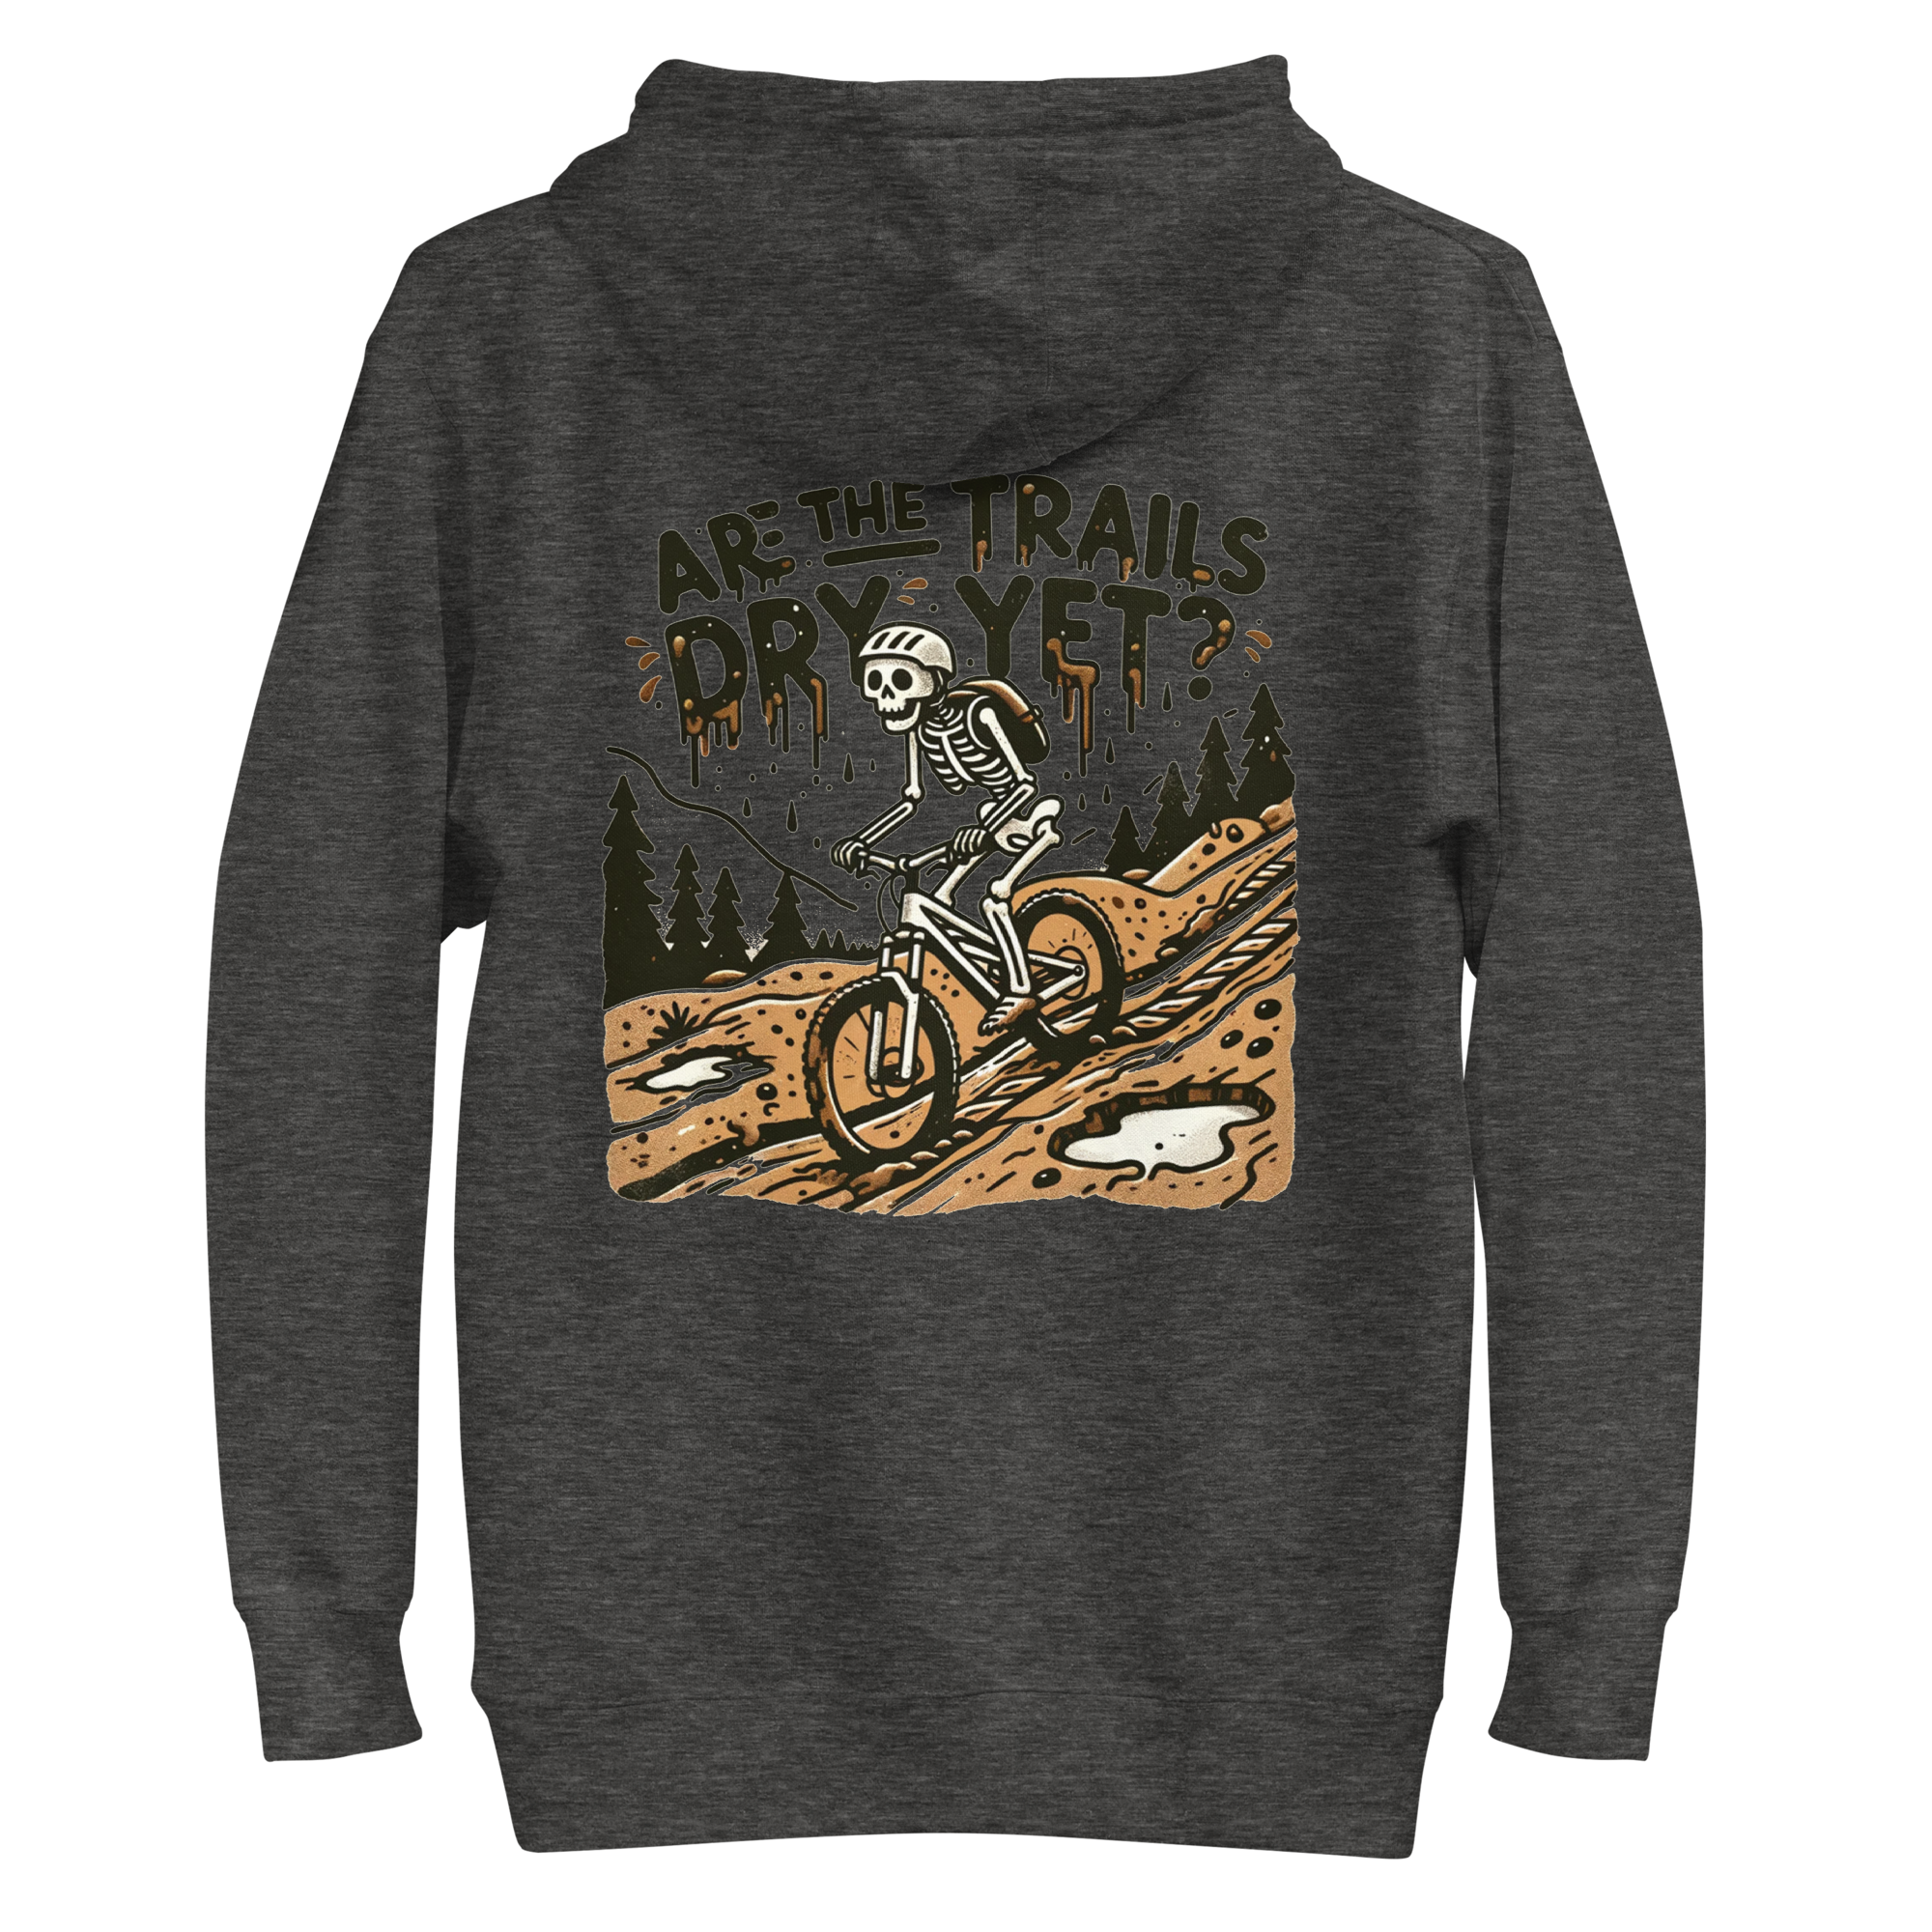 Are the Trails Dry Yet Hoodie